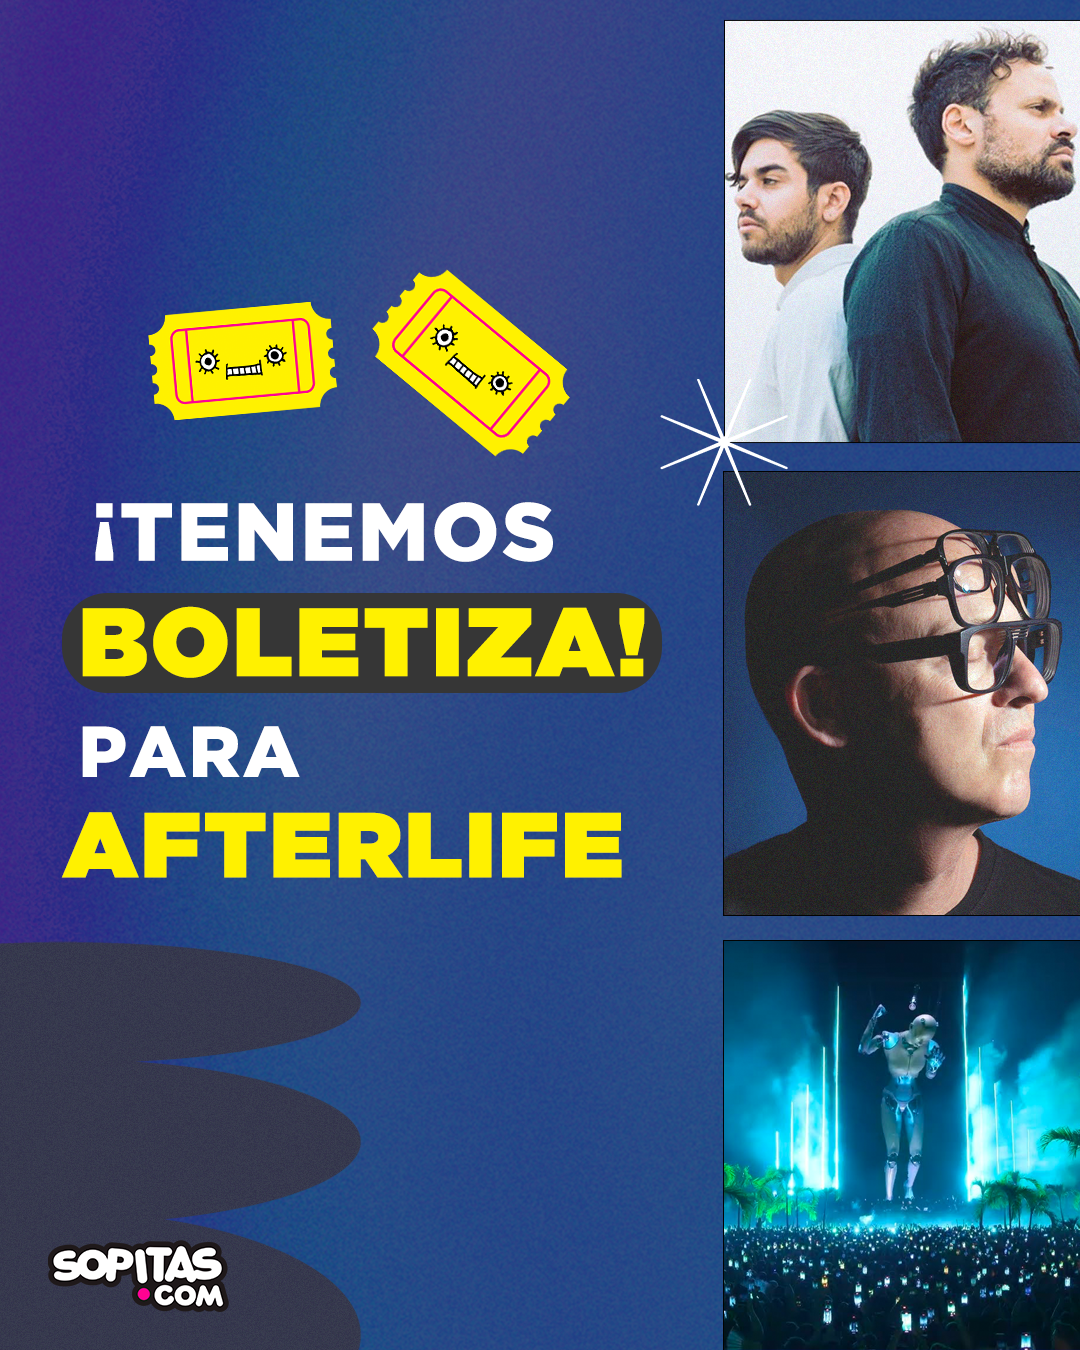 We give you tickets to jump into Afterlife CDMX 2023!